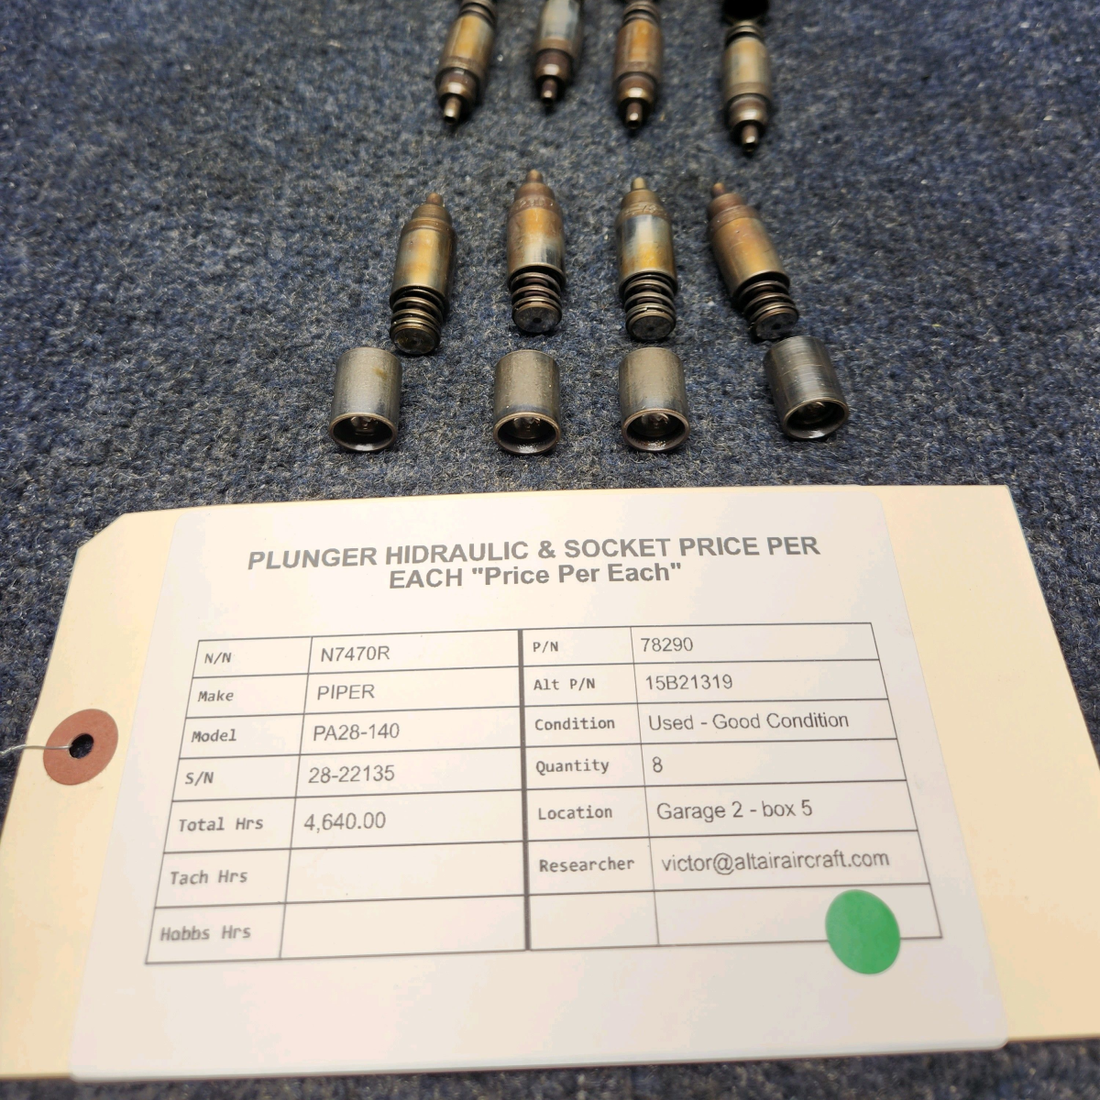 Used aircraft parts for sale, 78290 & 15B21319 Lycomoing  [part_model] PIPER PA28-140 PLUNGER HIDRAULIC & SOCKET PRICE PER EACH